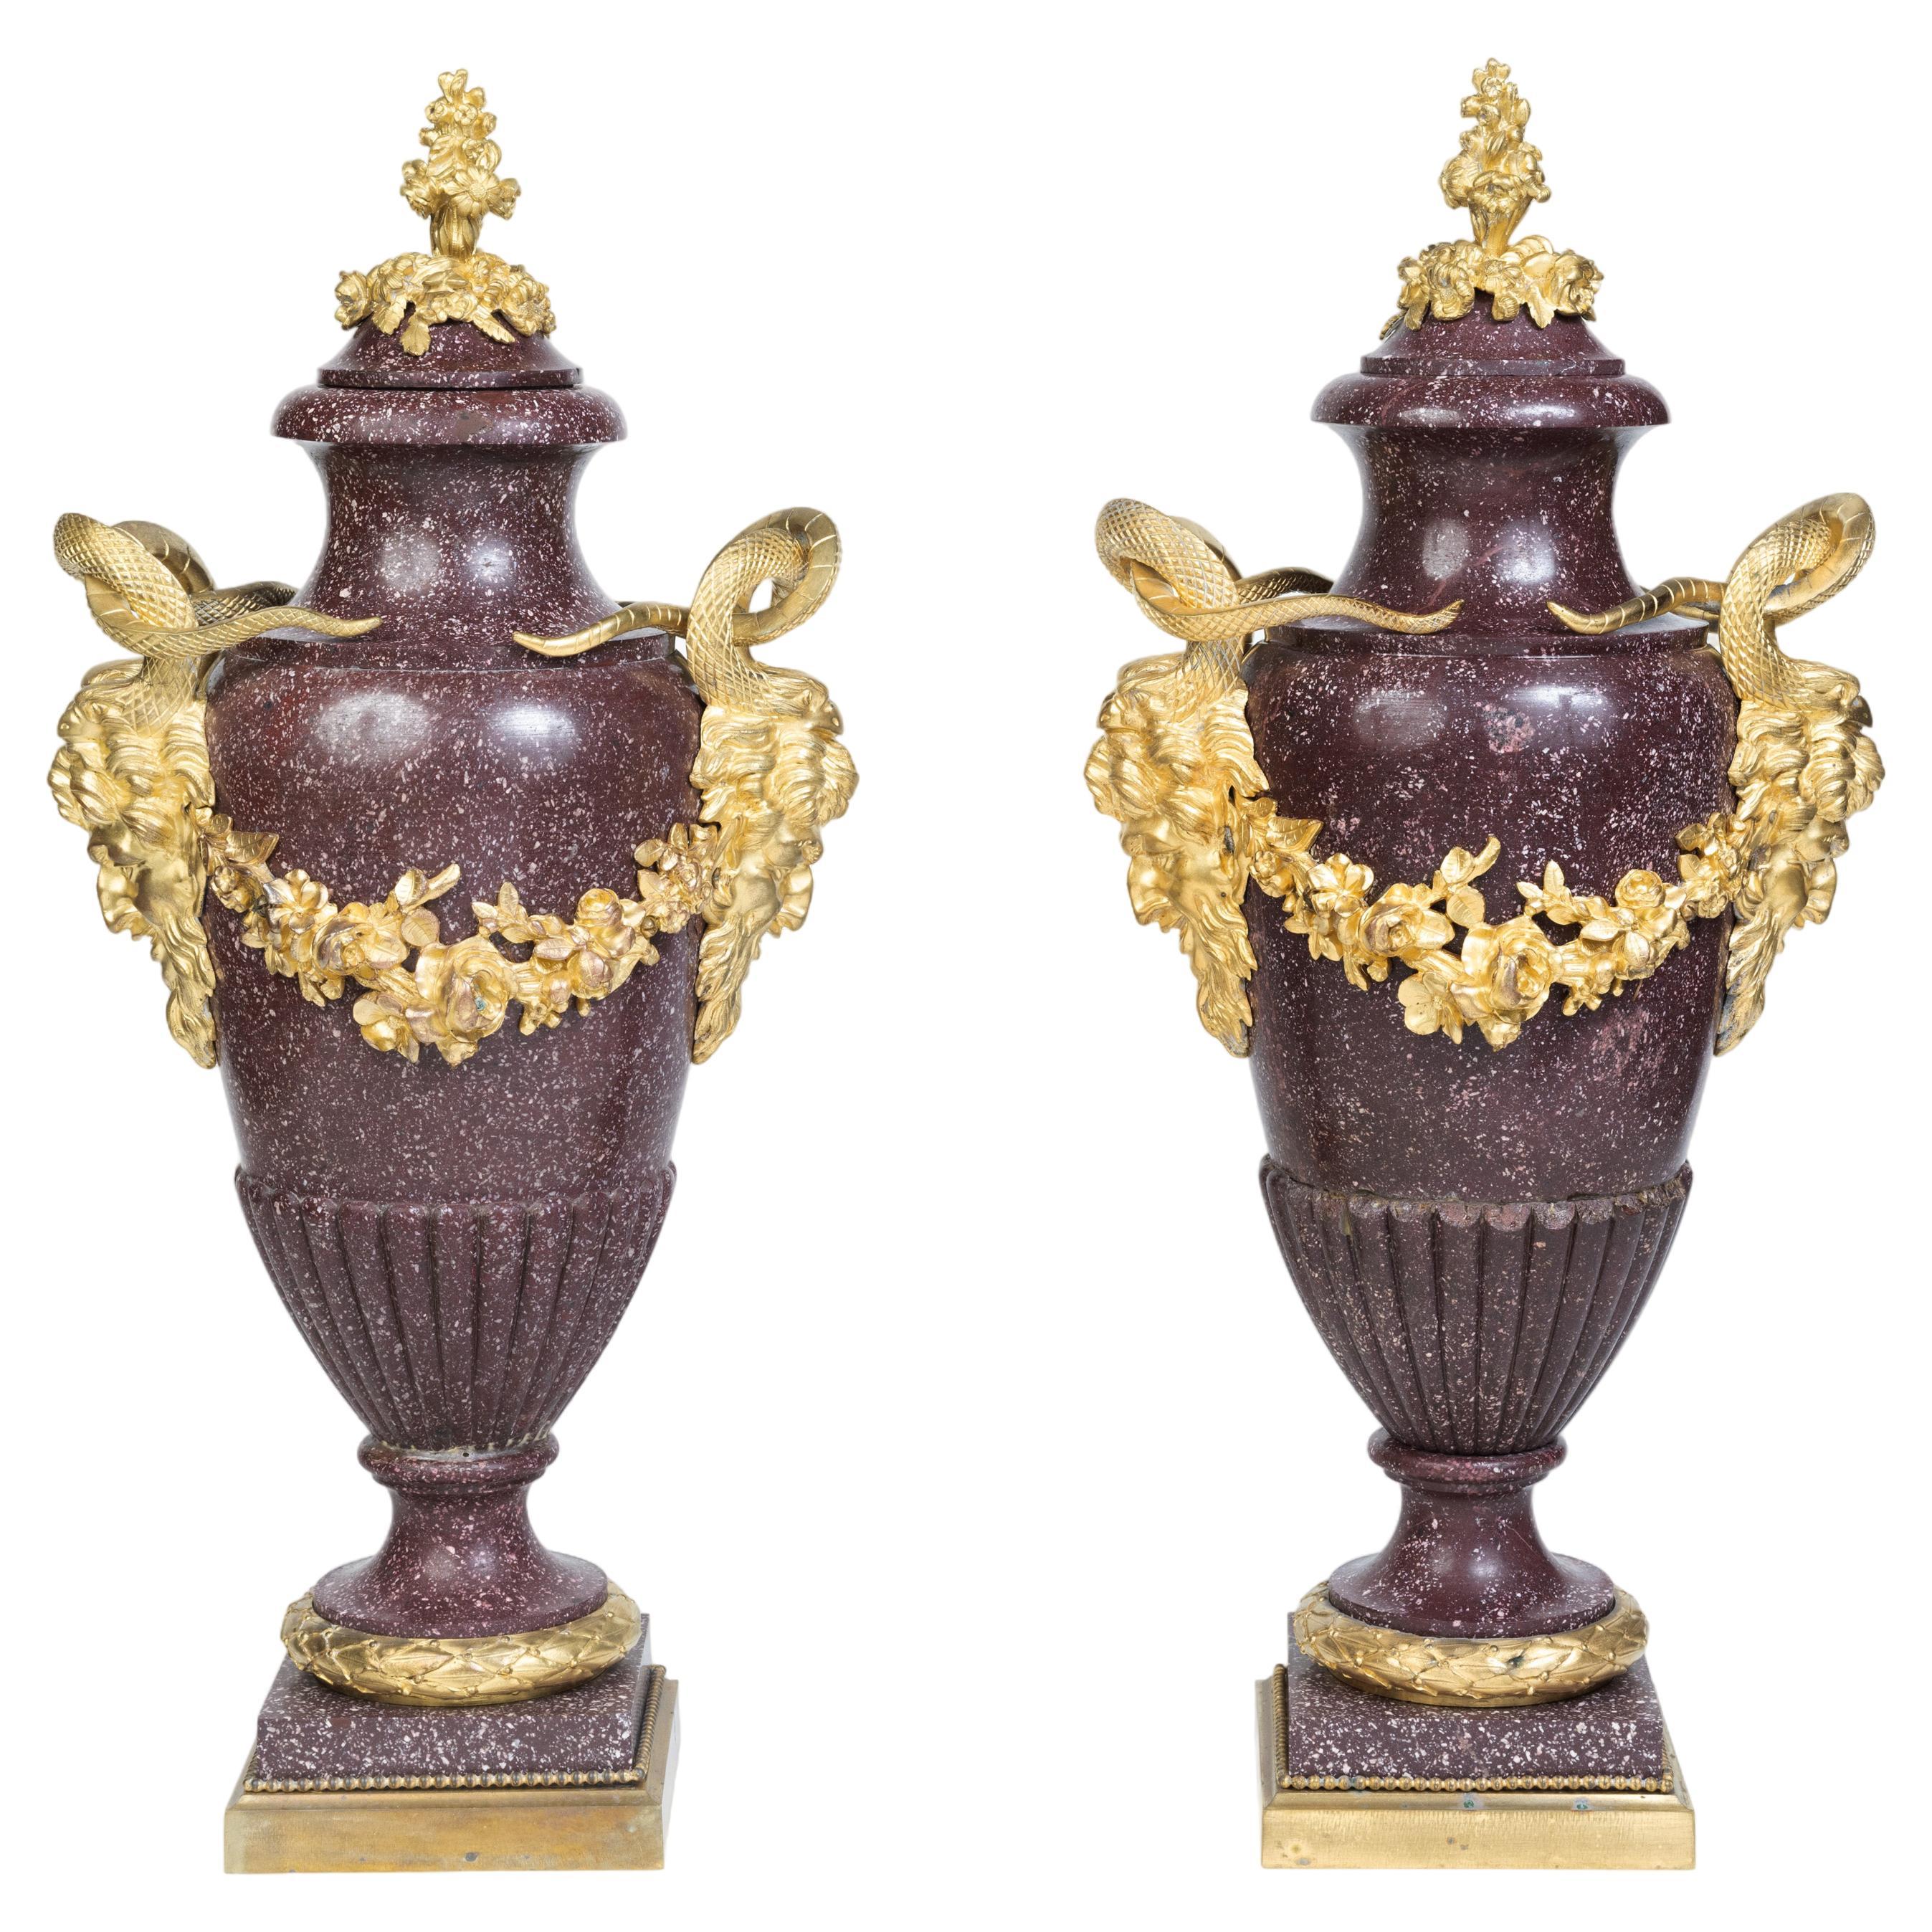 A Large Pair of French Ormolu-Mounted Porphyry Vases